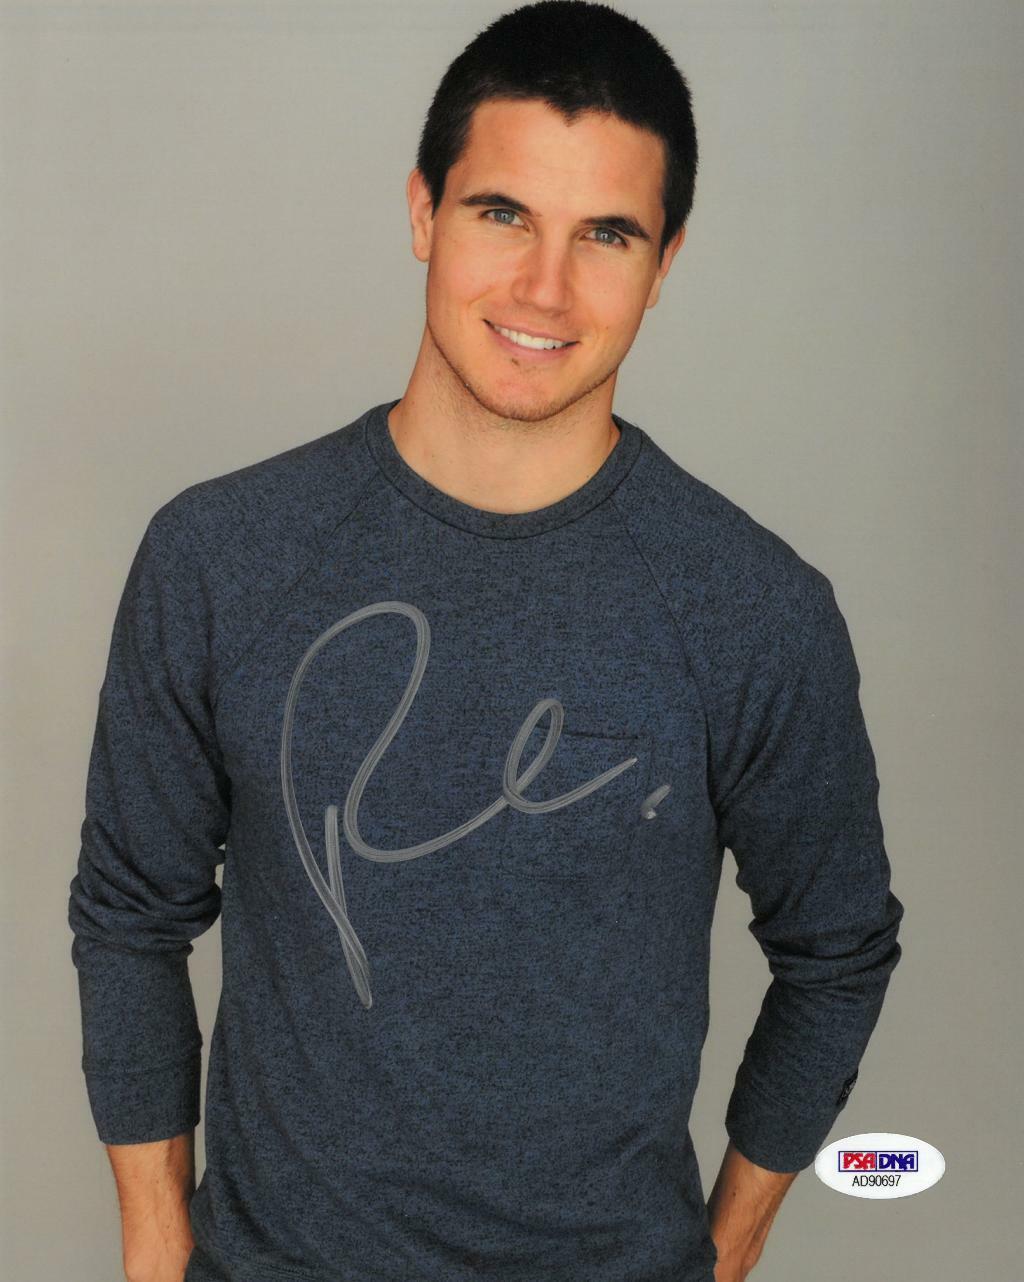 Robbie Amell Signed Authentic Autographed 8x10 Photo Poster painting PSA/DNA #AD90697